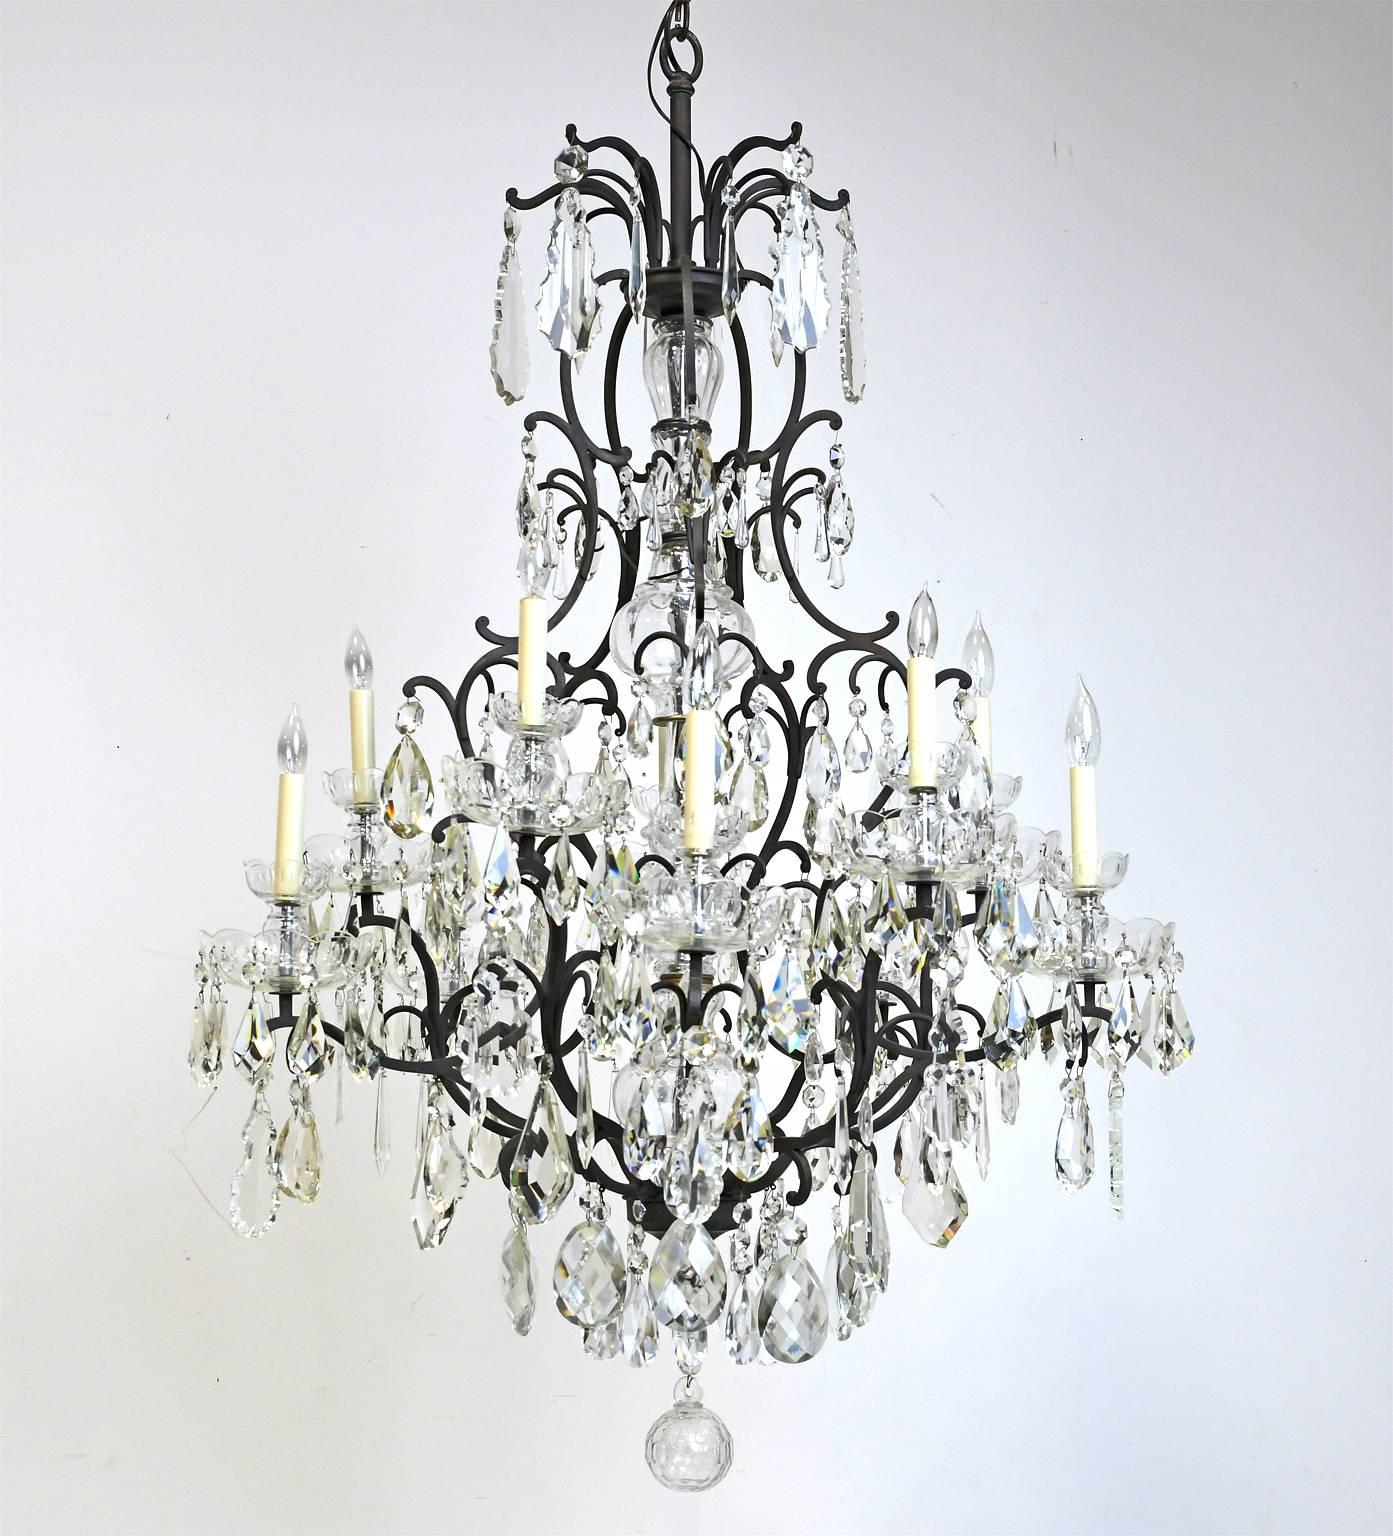 Rococo Revival Large Ten-Light Chandelier with Glass Crystals and Wrought Iron Open Cage Frame 